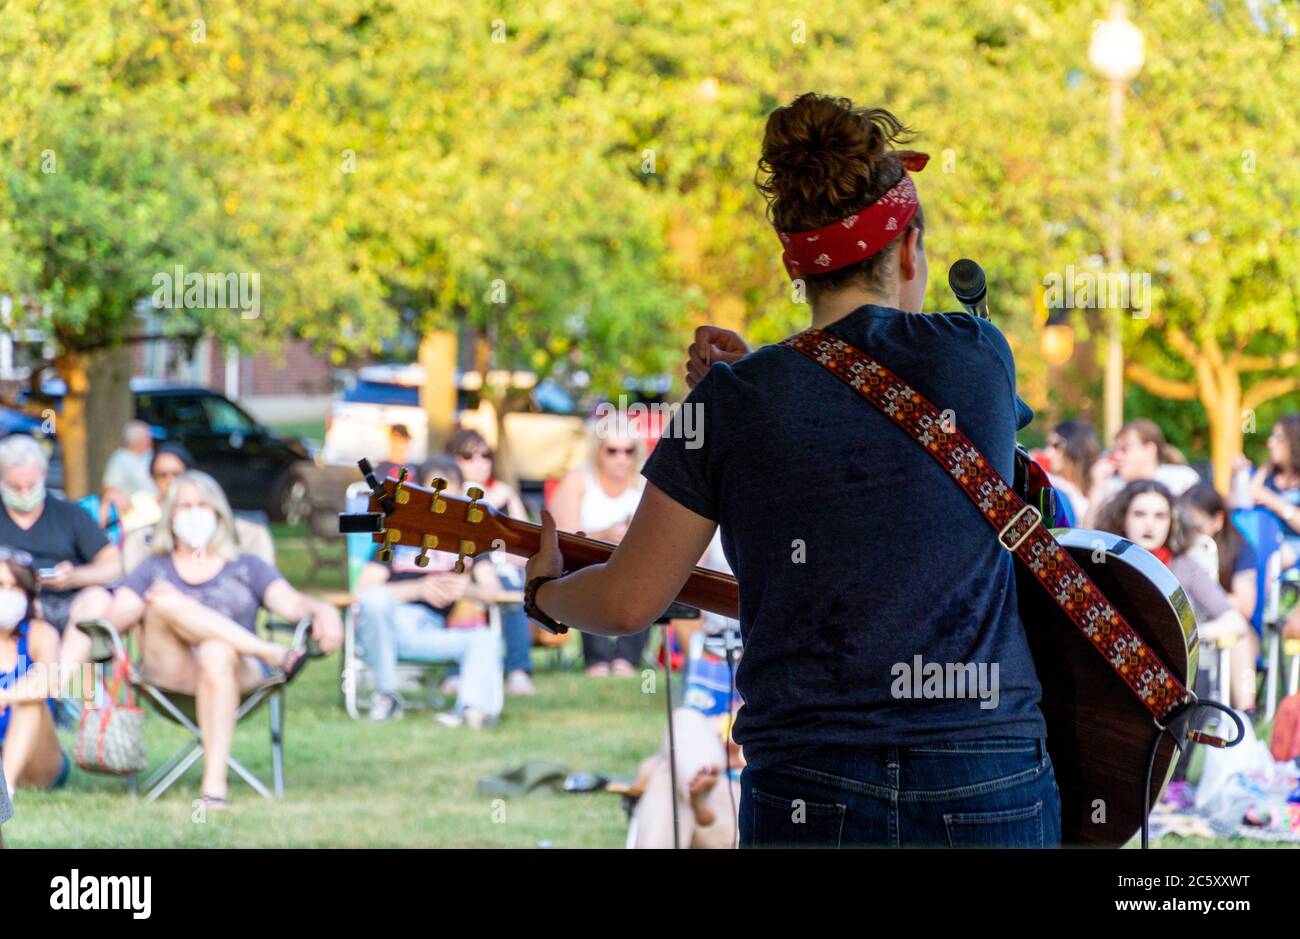 McGowan Park Summer Concerts - Sandy Stones Trio Band - Woman playing guitar in front of crowd in public park Stock Photo